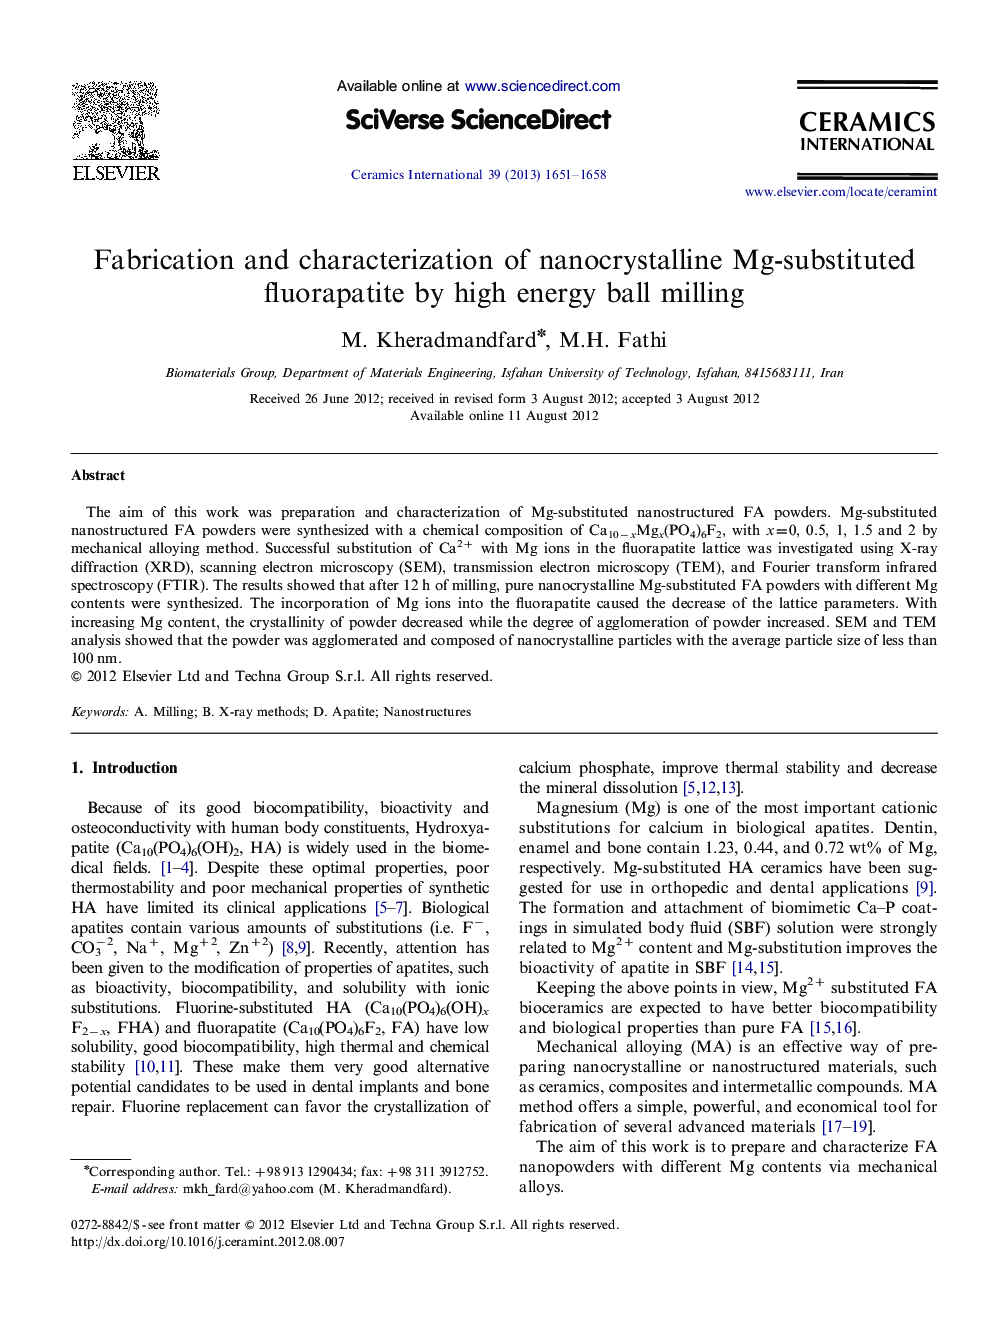 Fabrication and characterization of nanocrystalline Mg-substituted fluorapatite by high energy ball milling